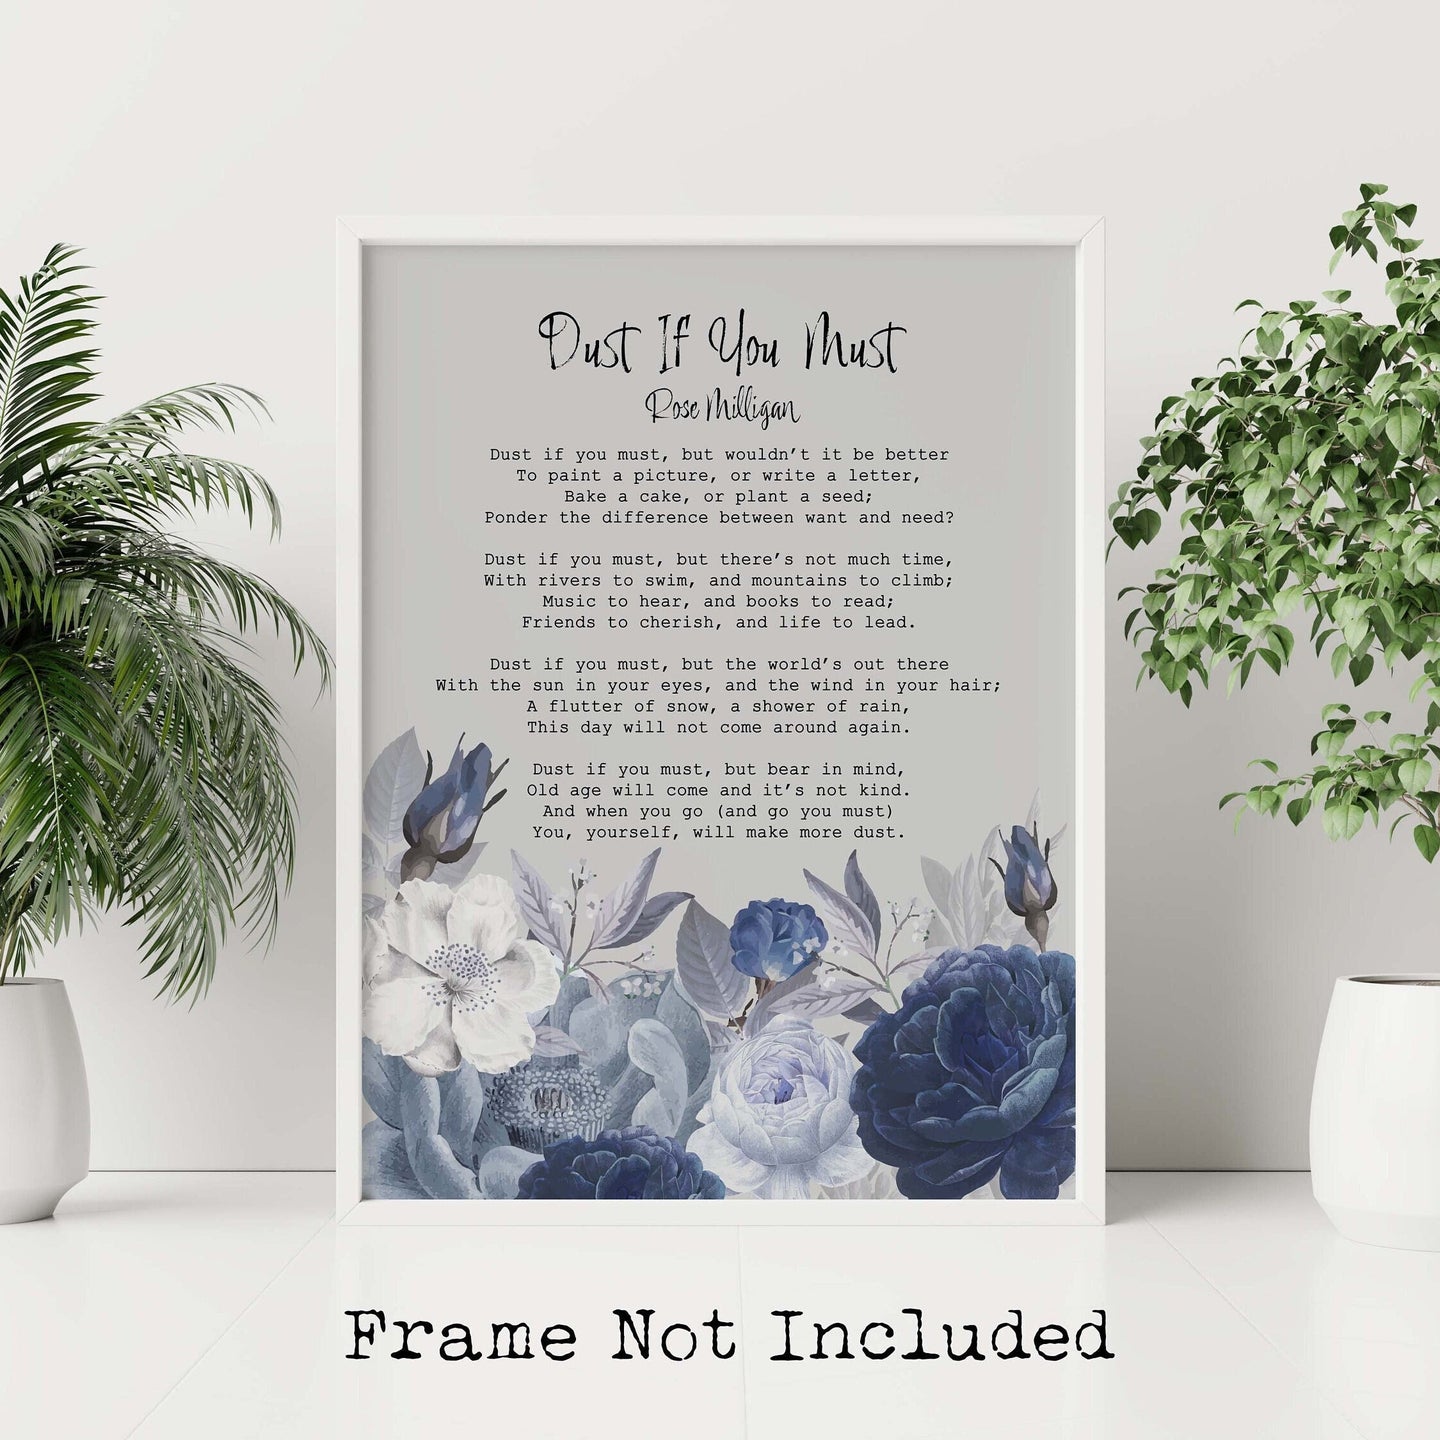 Dust If You Must Poem Print by Rose Milligan - Funny Poem Poster Print - Navy and Grey Floral Illustrated Poetry